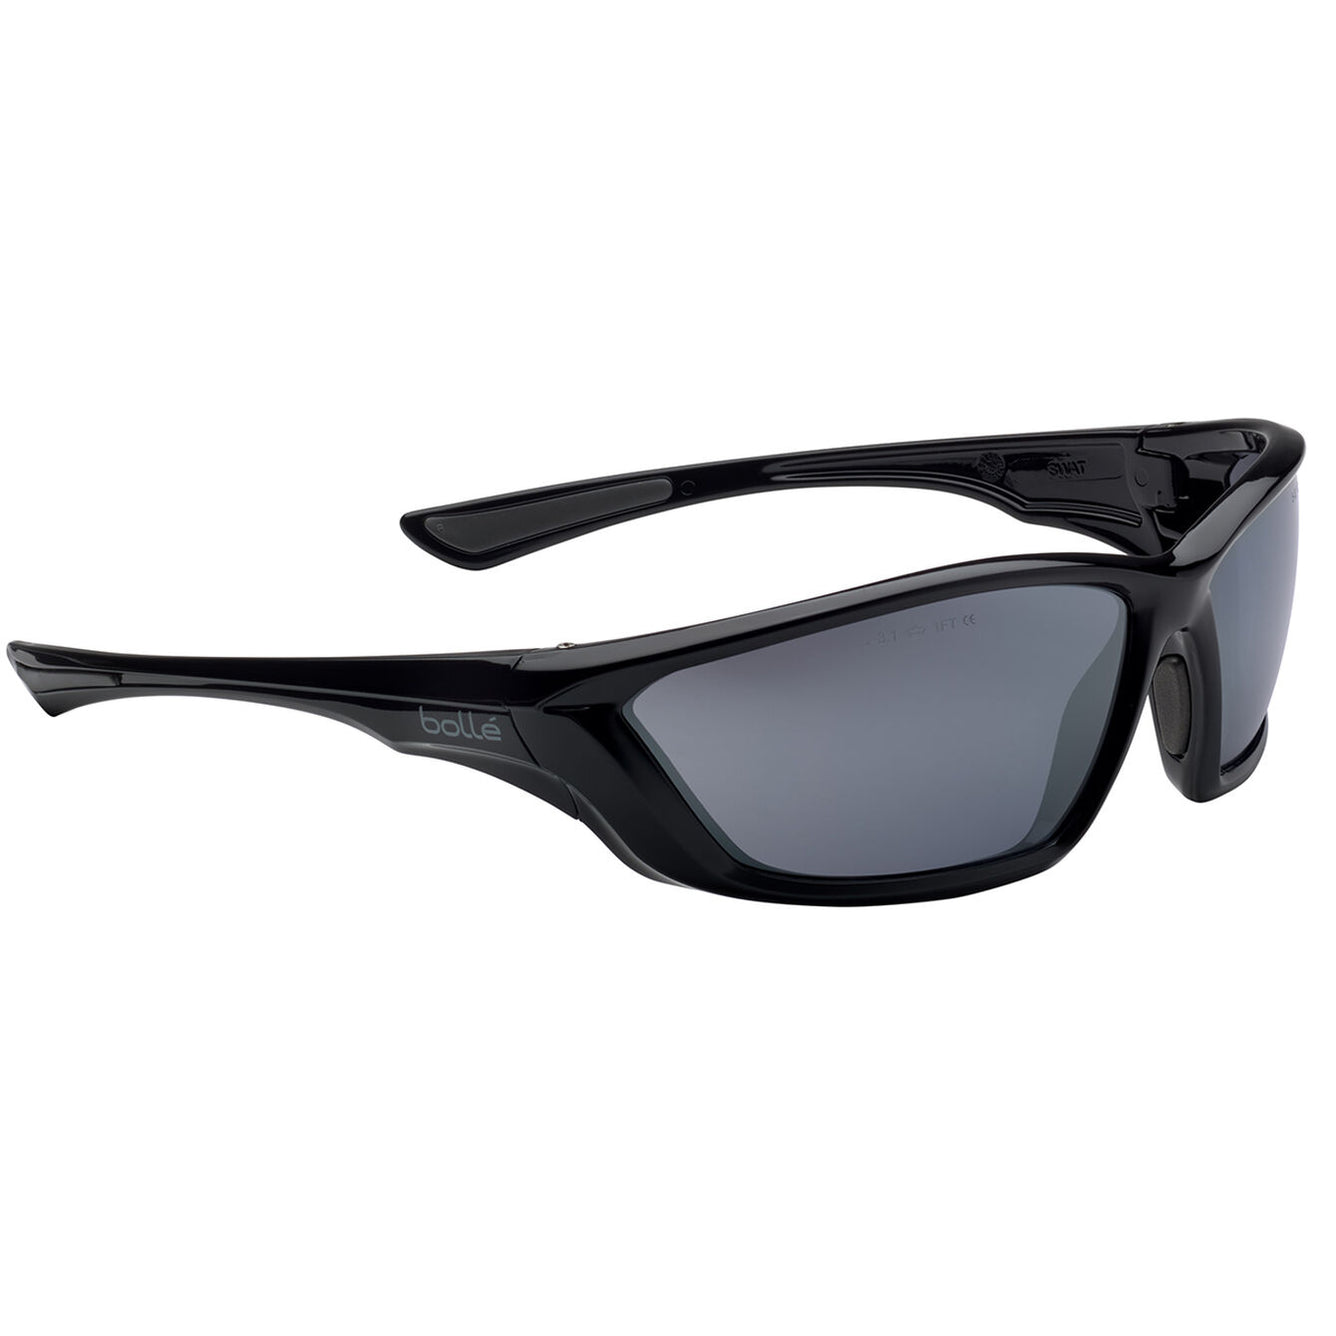 Bolle Safety - SWAT - Silver flash ballistic glasses - 40138